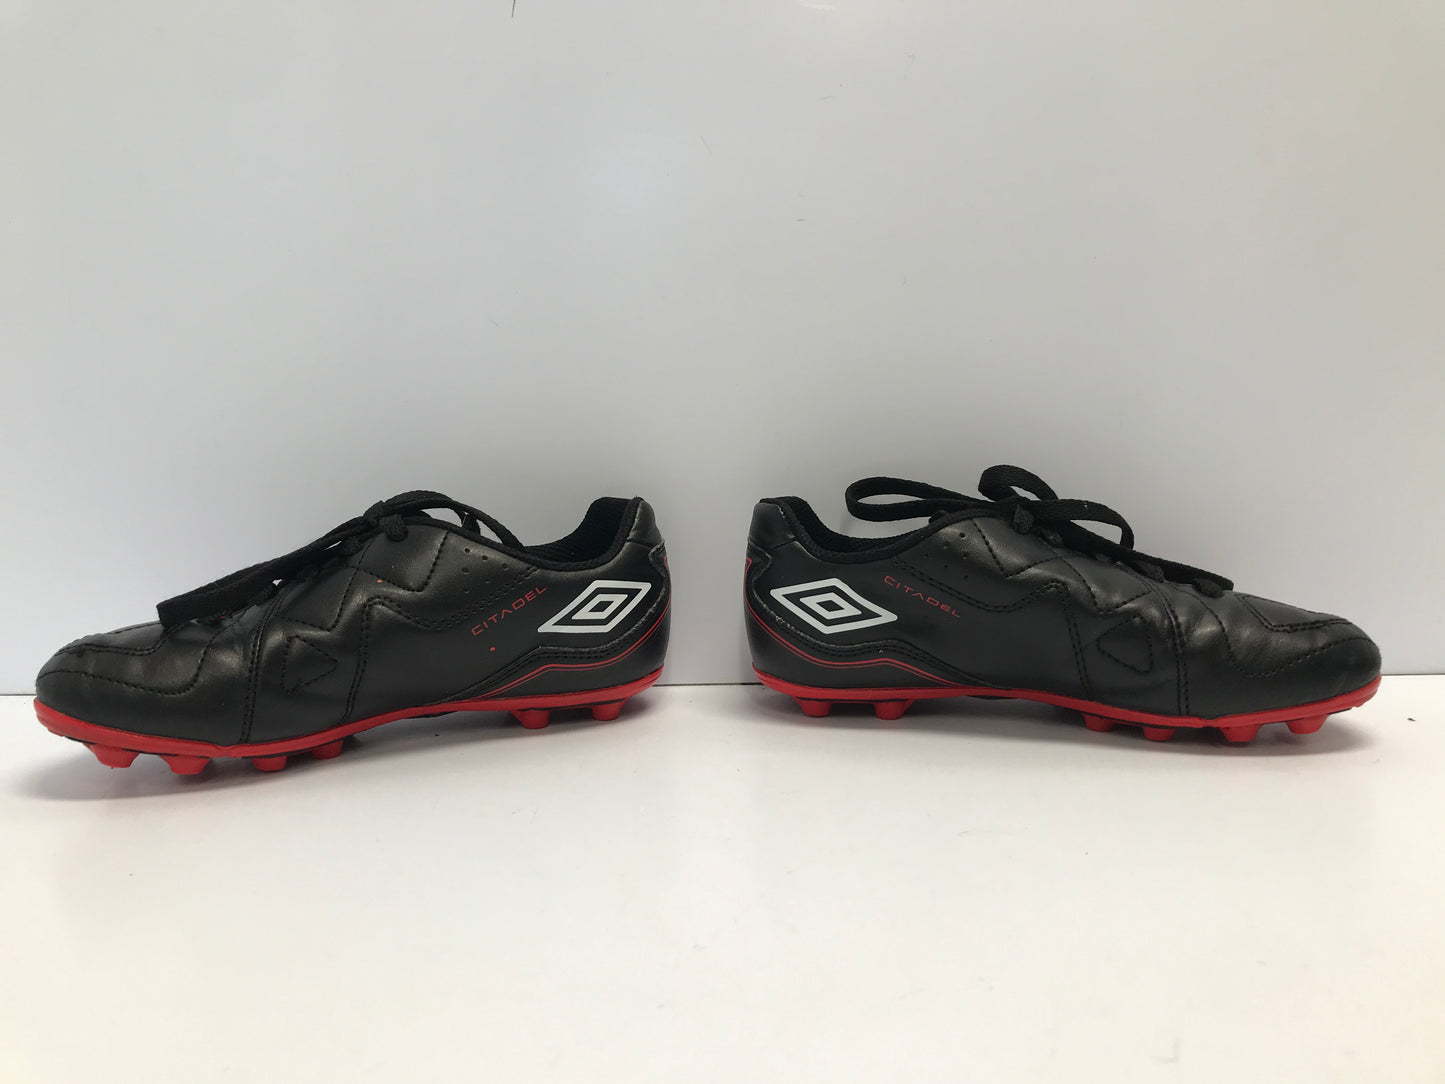 Soccer Shoes Cleats Child Size 1 Umbro Black Red Excellent